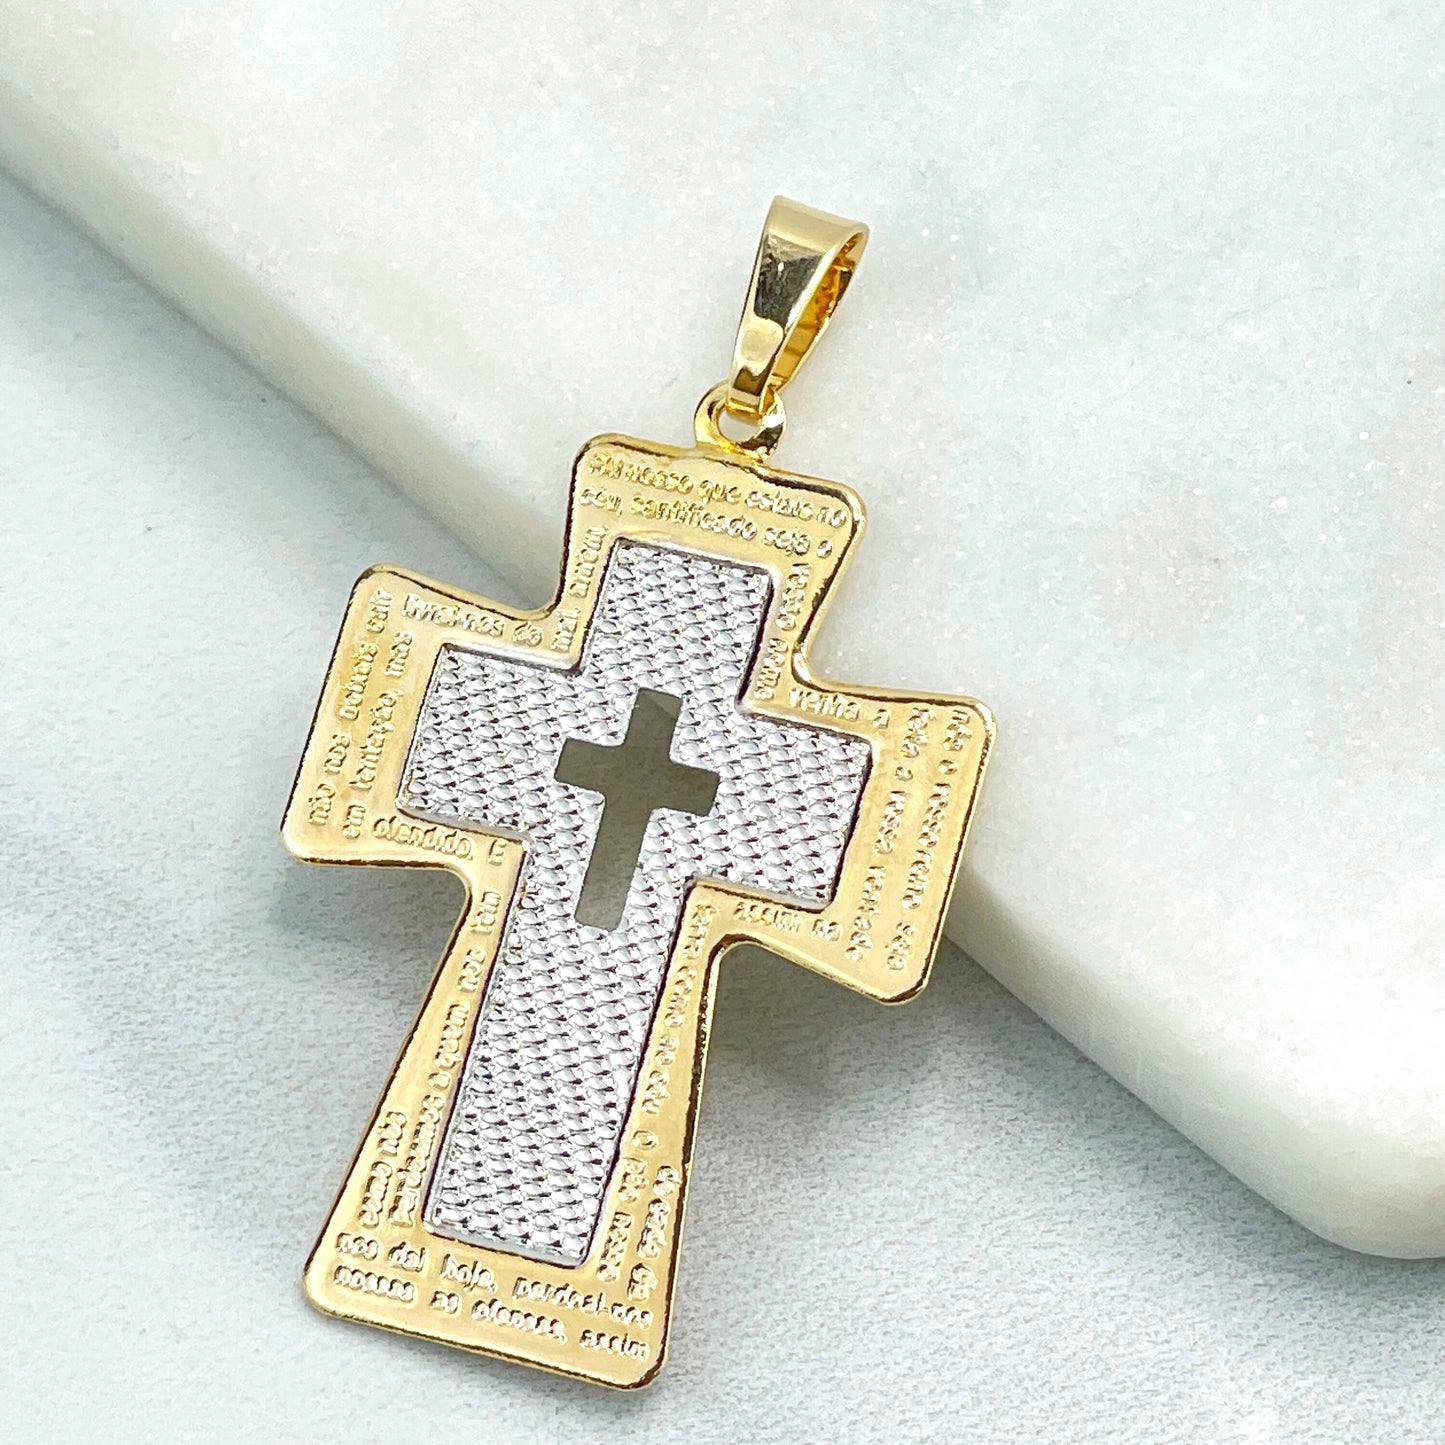 18k Gold Filled Texturized & Cutout Two Tone Crucifix Cross Shape with Clear Cubic Zirconia Charm Pendant, Wholesale Jewelry Making Supplies